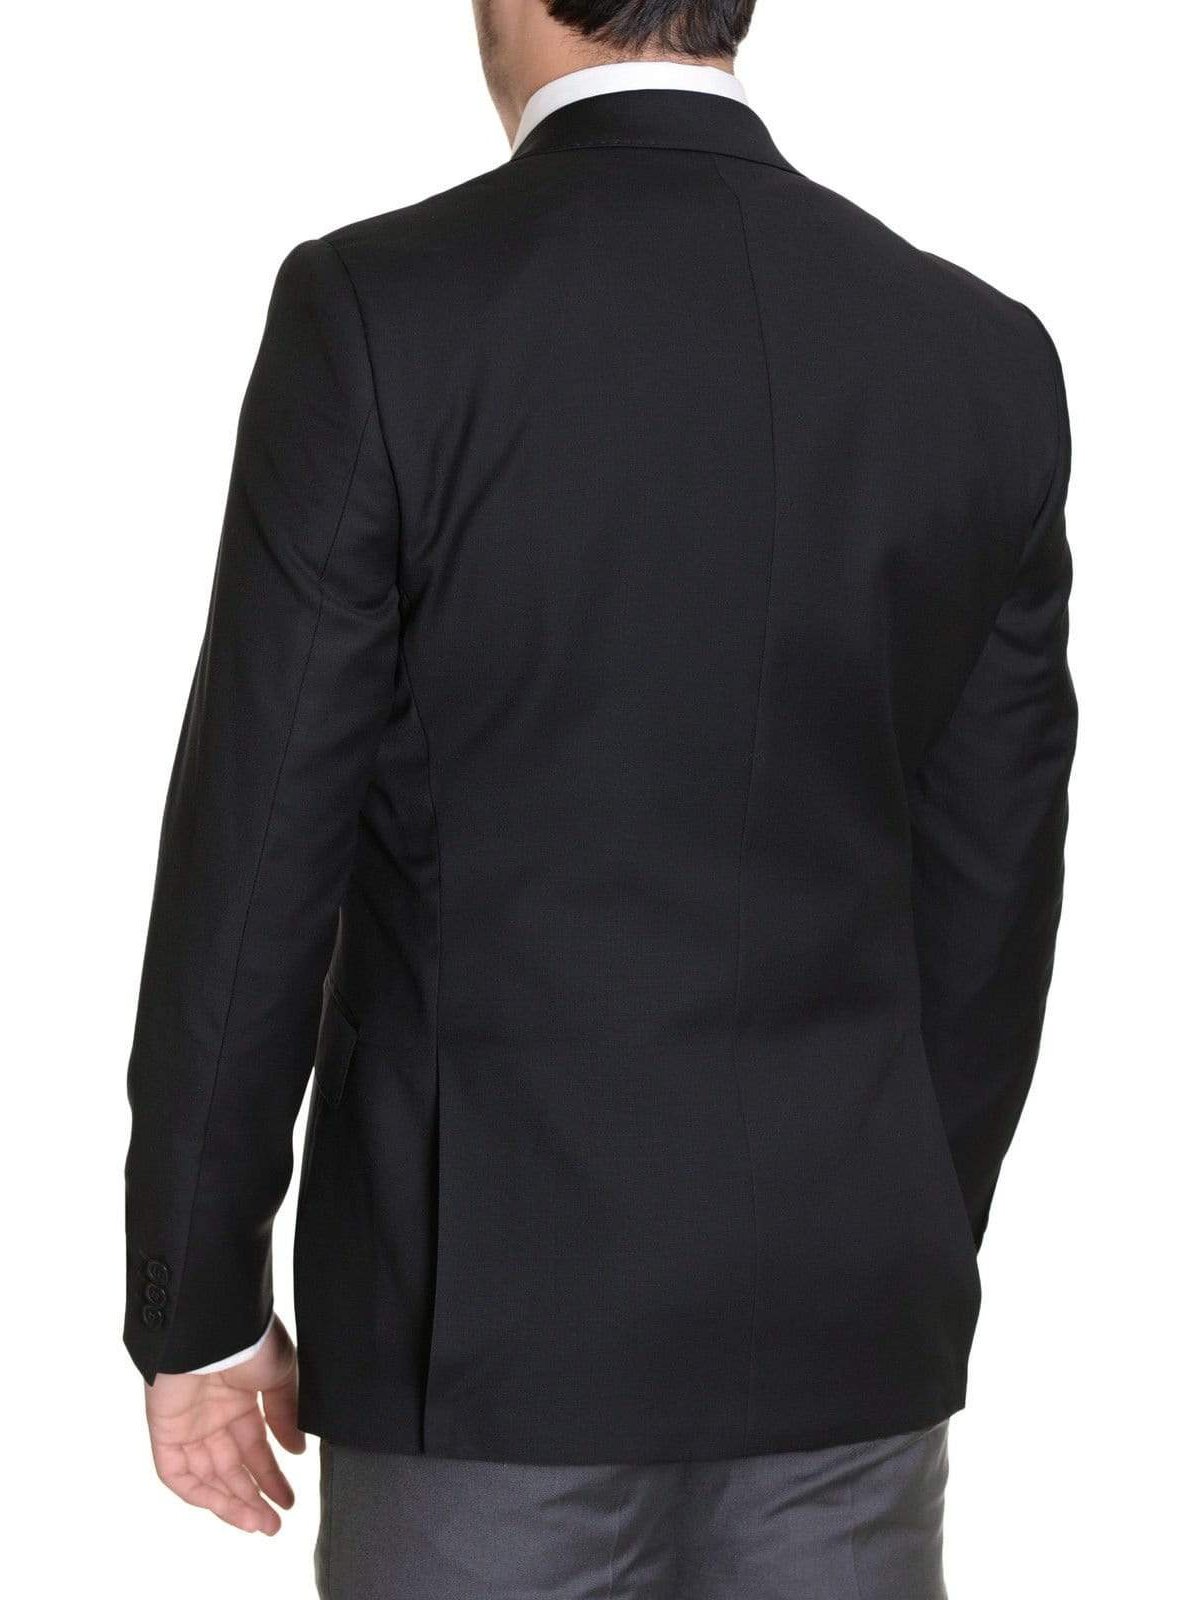 The Suit Depot Mens Bestselling Jackets Mens Extra Slim Fit Solid Black Two Button Wool Blazer Suit Jacket